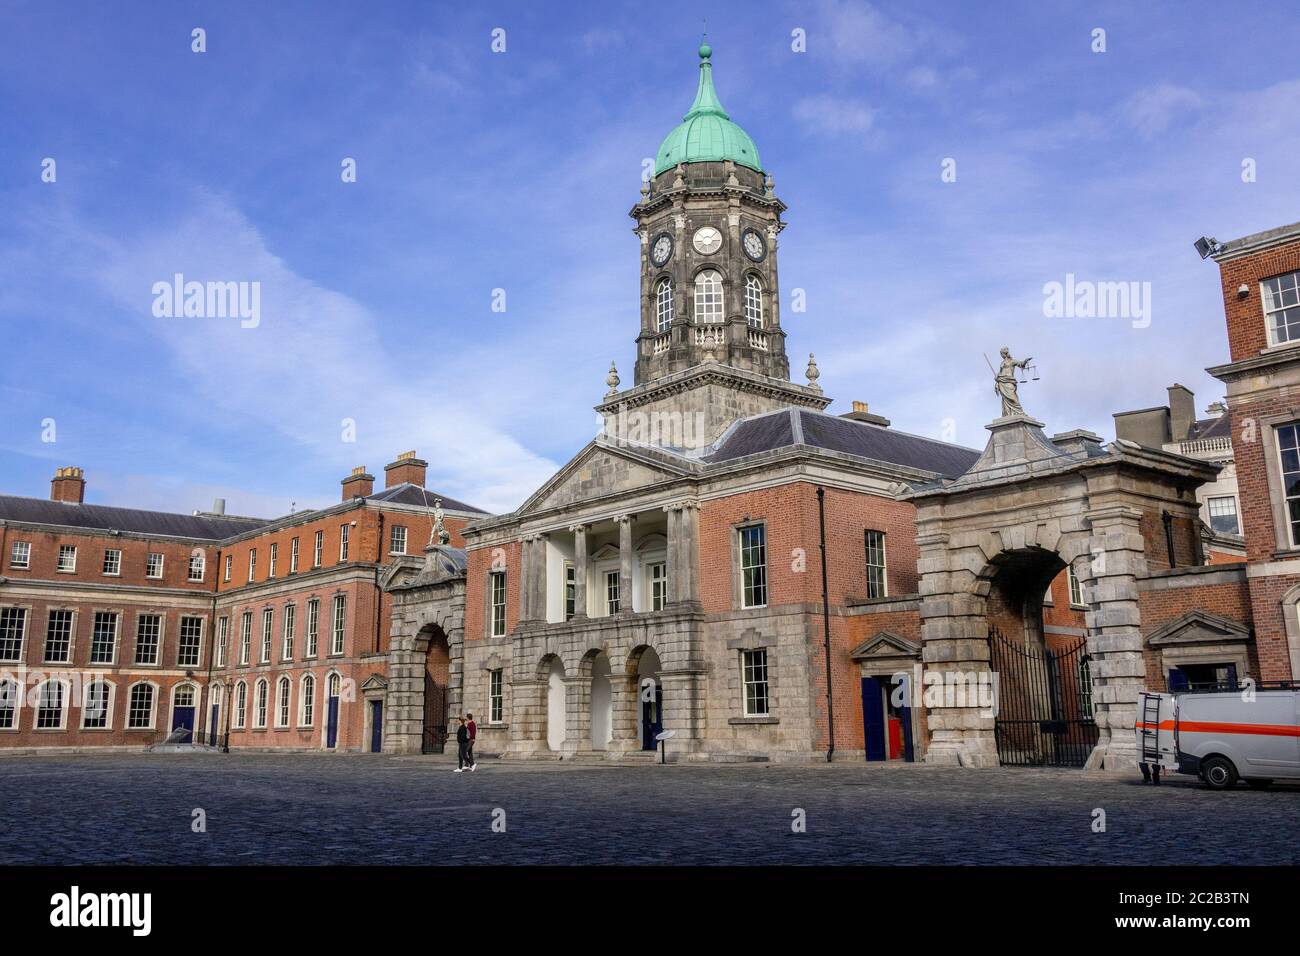 Bedford Tower At Dublin Castle Ireland Where The Irish Crown Jewels Were Stolen From Stock Photo